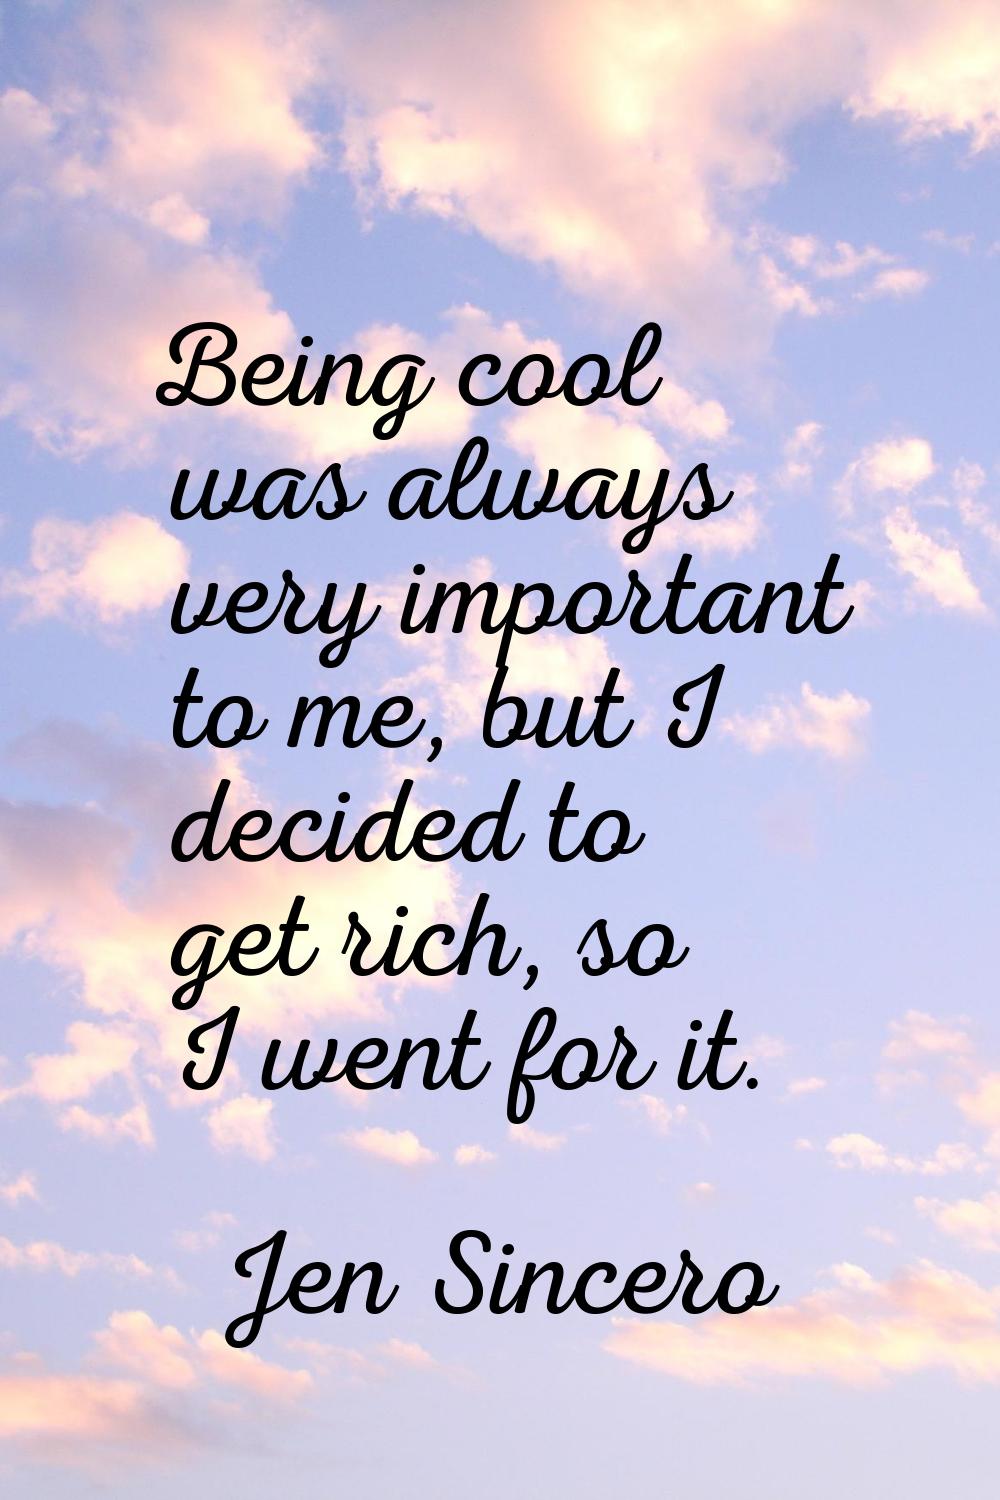 Being cool was always very important to me, but I decided to get rich, so I went for it.